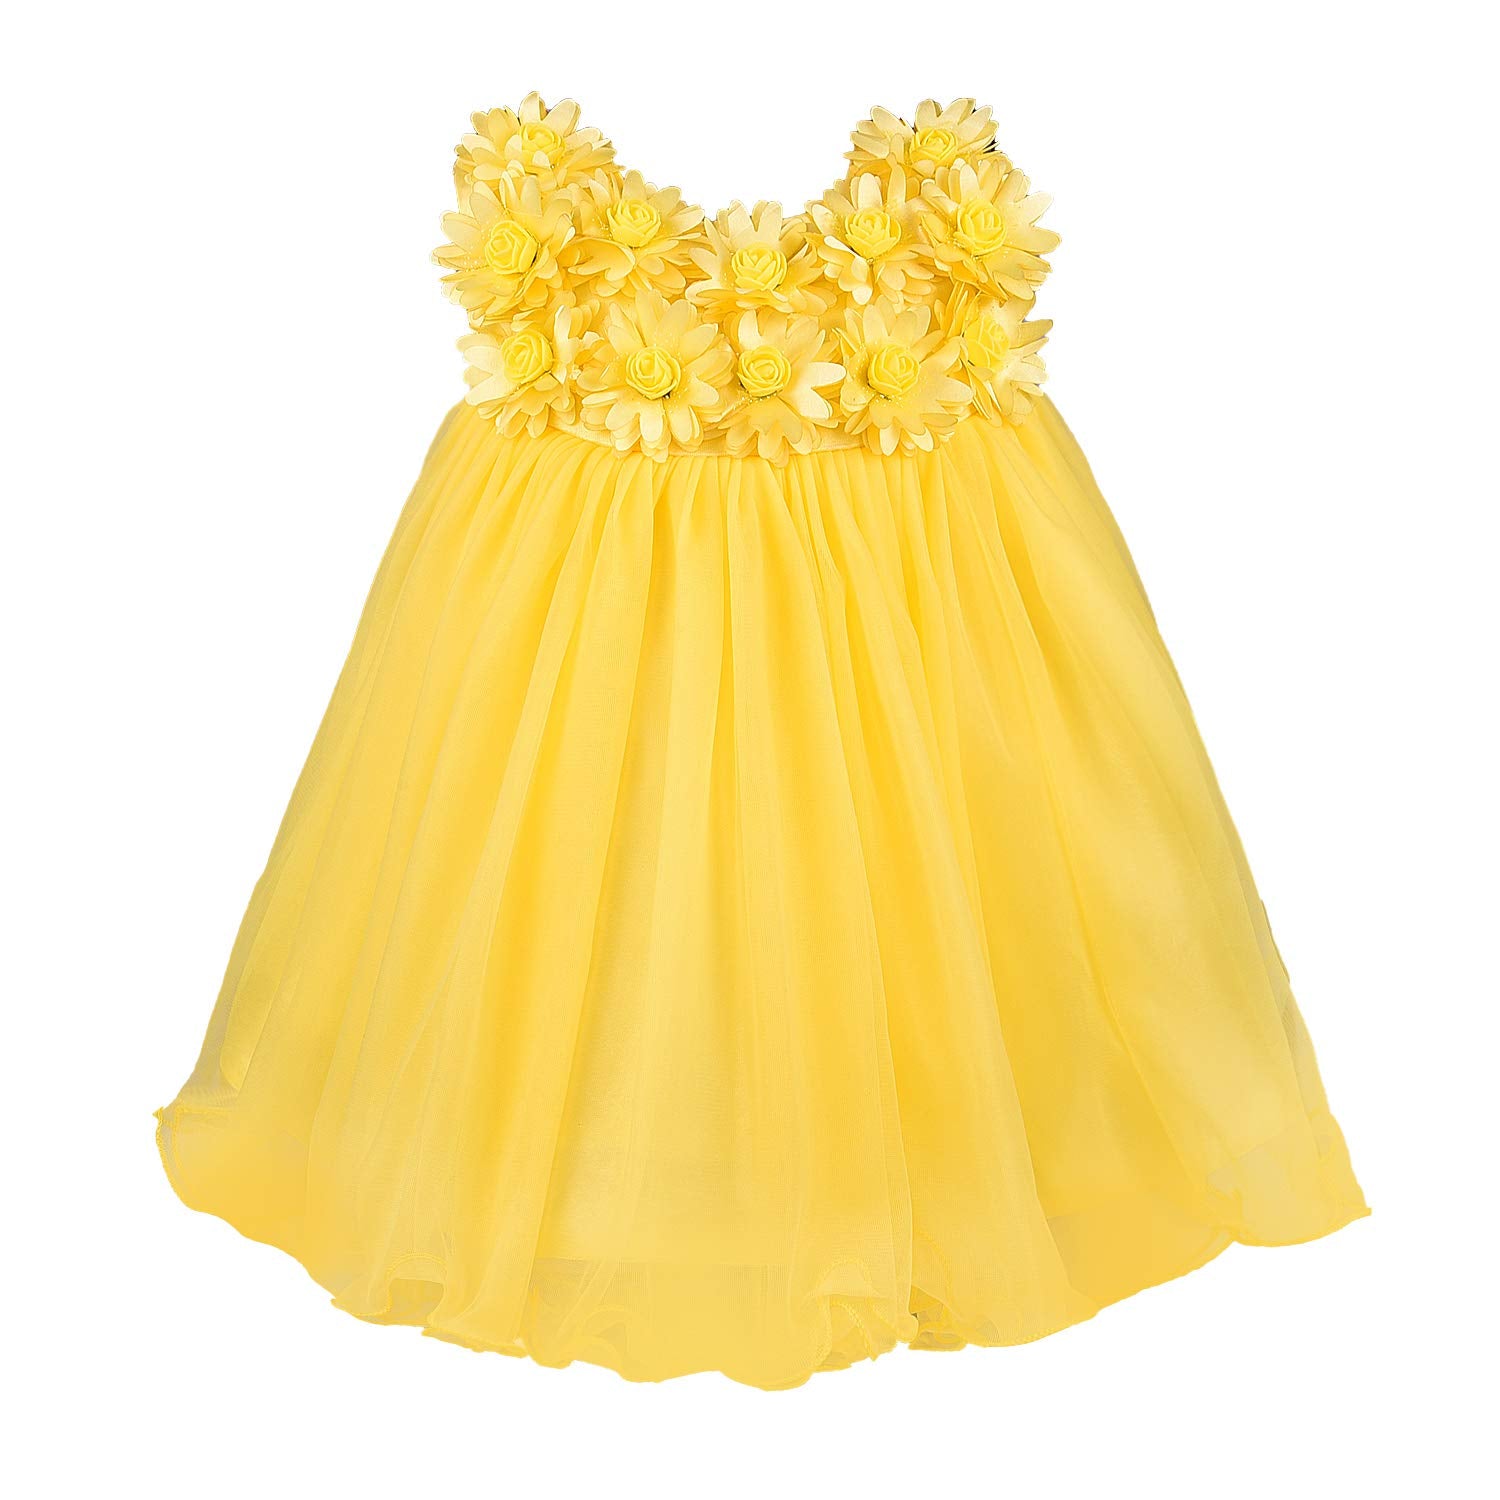 Baby Girls Party Wear Frock Birthday Dress For Girls bxa197y - Wish Karo Party Wear - frocks Party Wear - baby dress